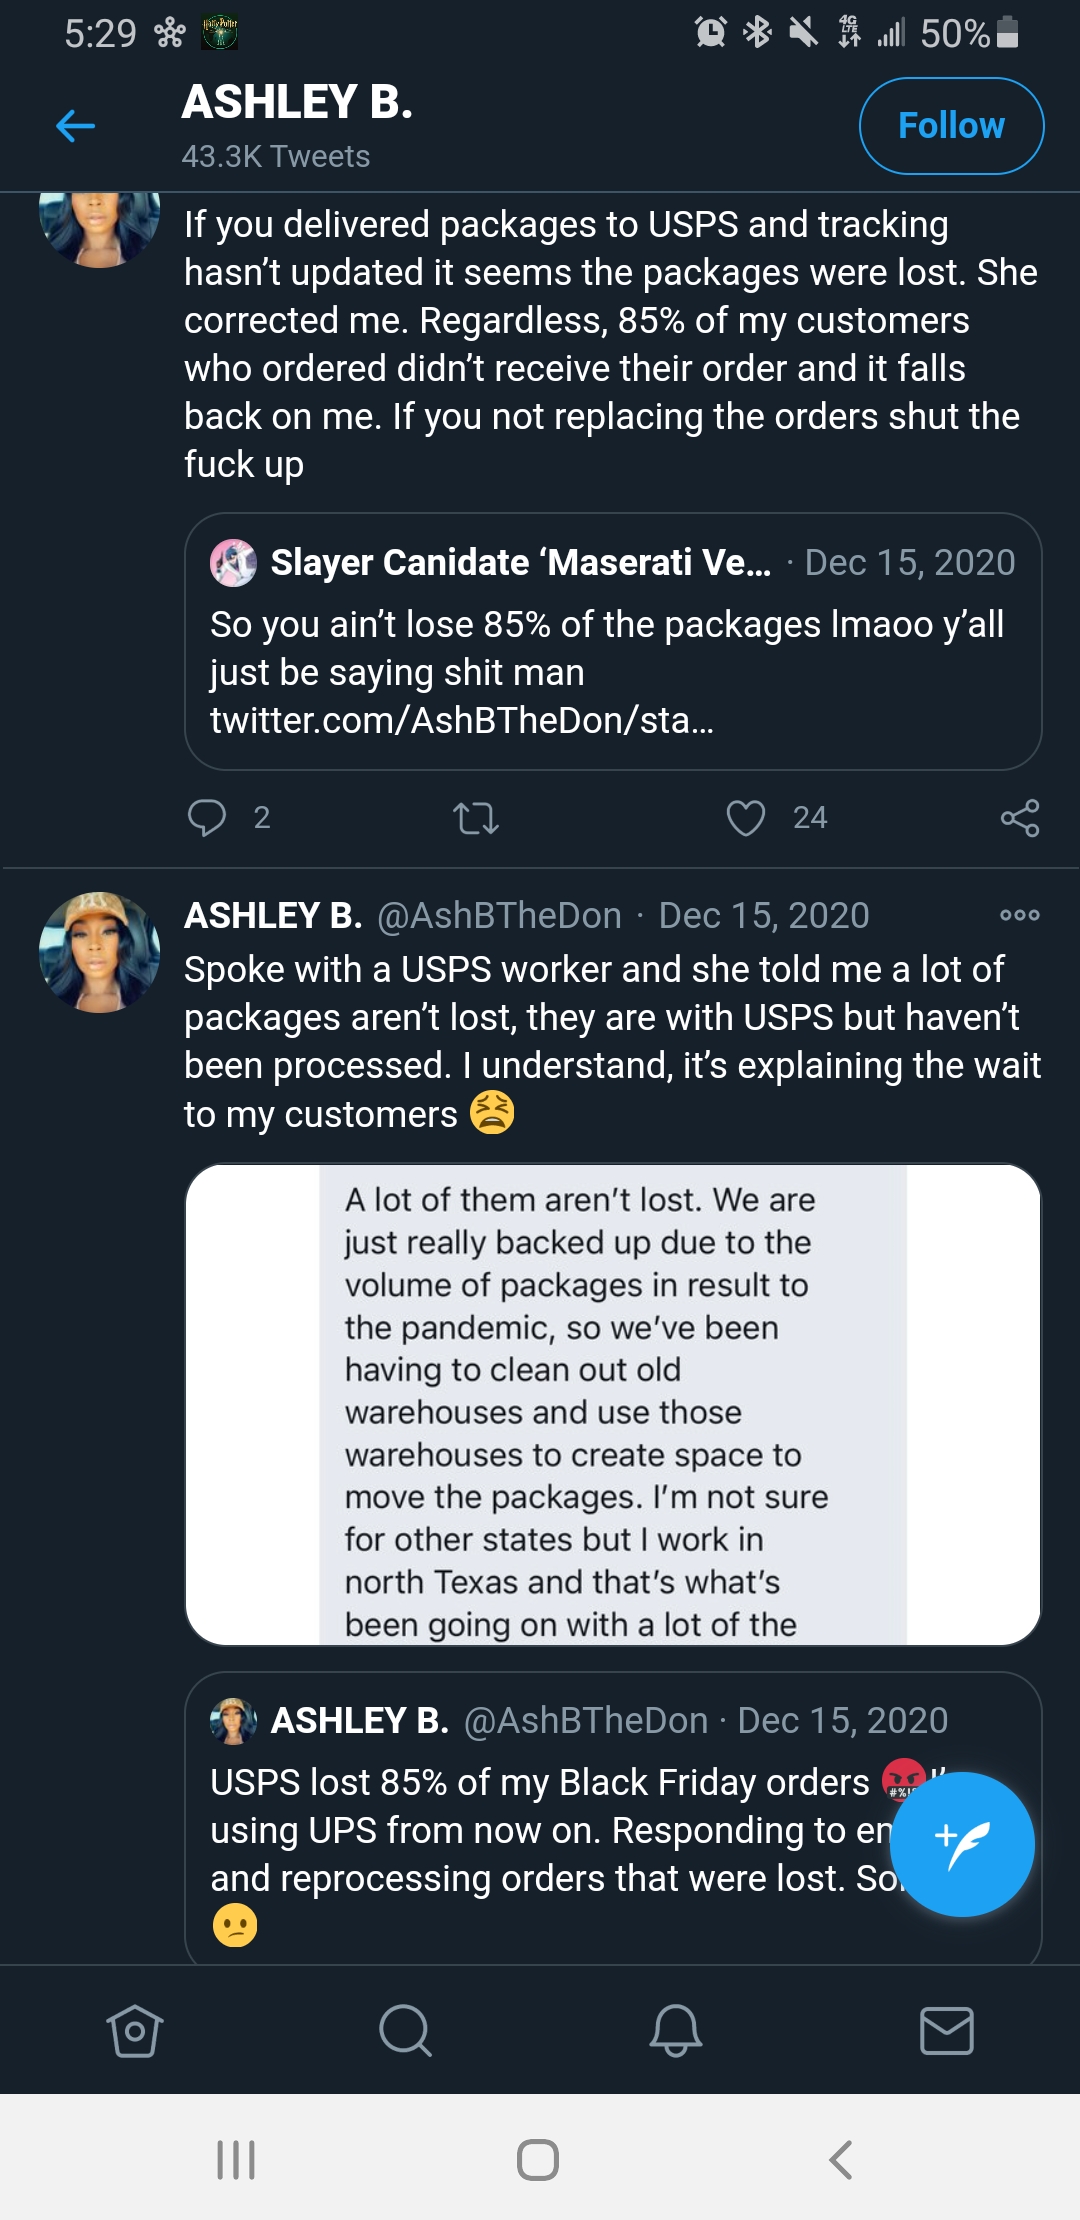 Posts from owner about 85% of packages lost